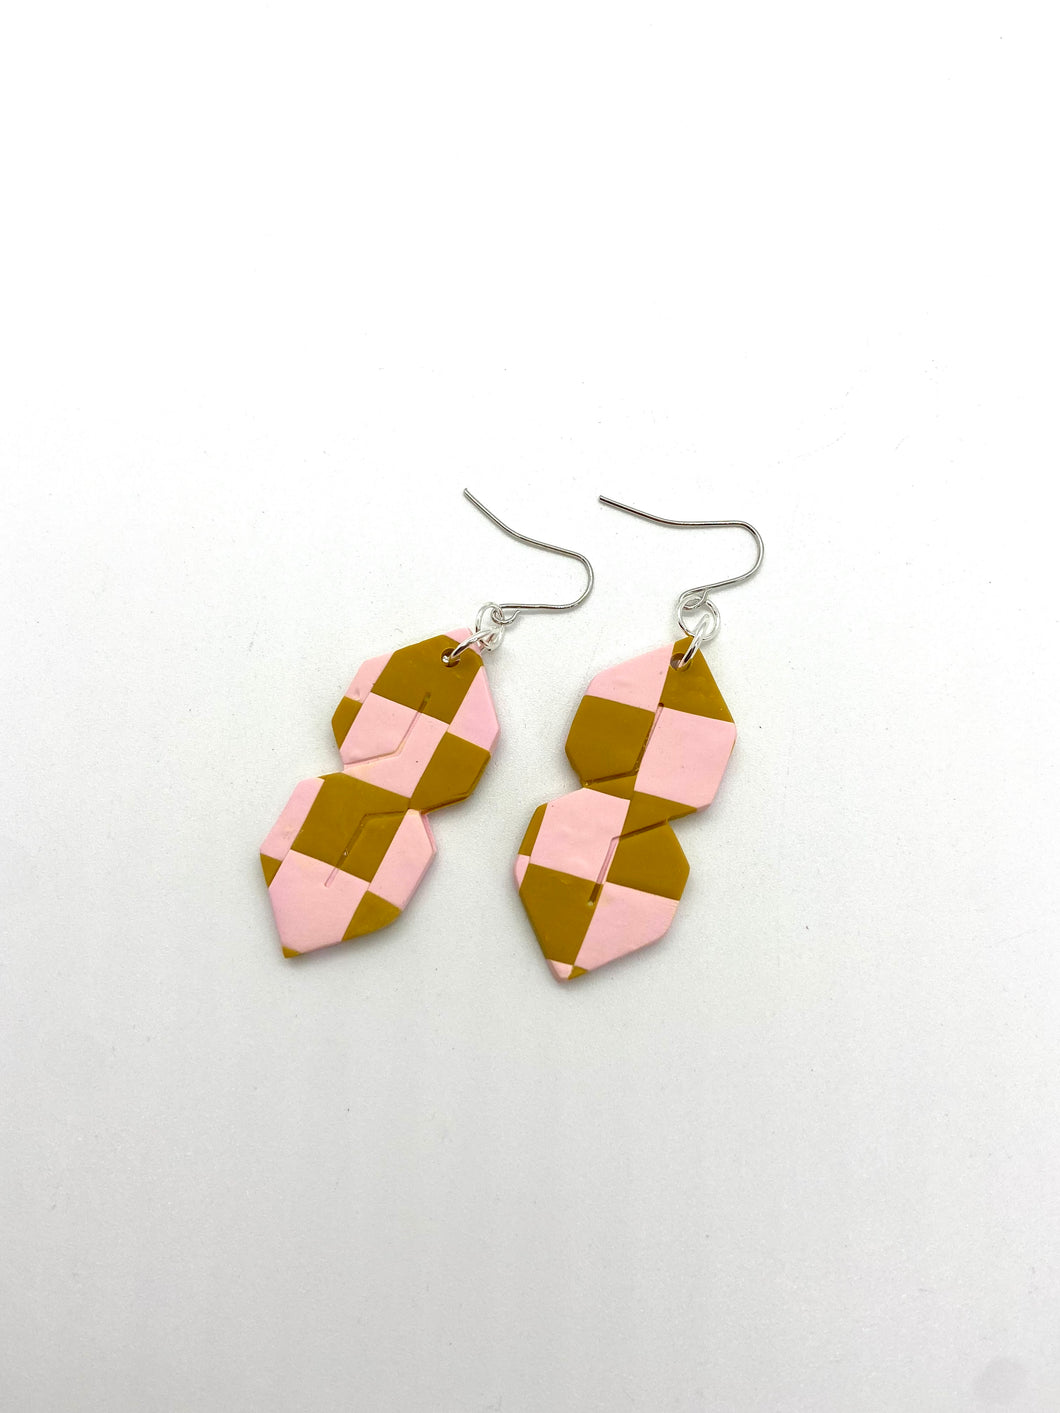 cool S earrings- pink and mustard checker